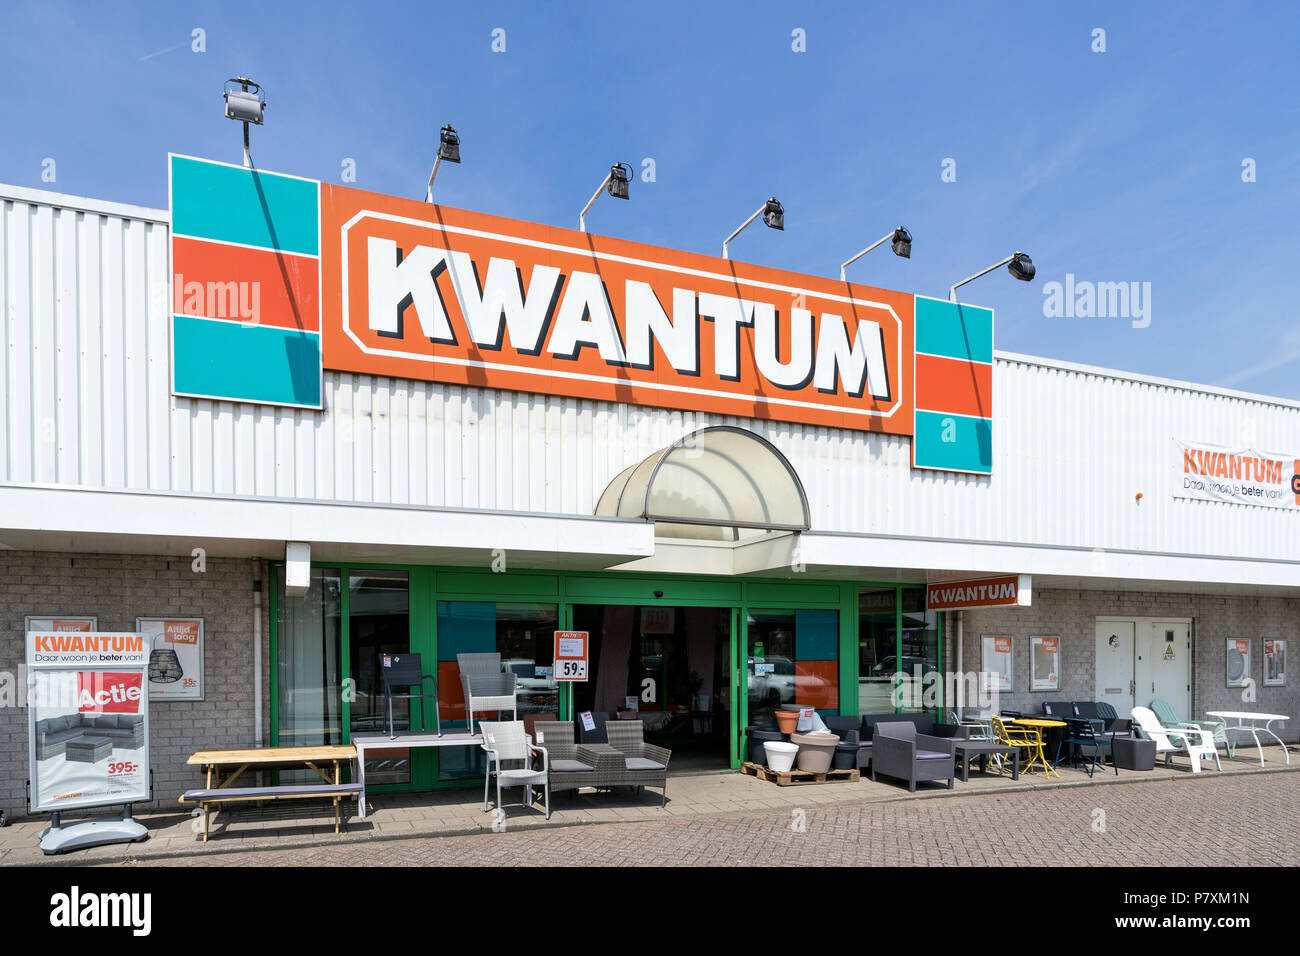 bijtend Zee pak Kwantum store. Kwantum is a discount retailer that offers an assortment of  living products in the areas of coverings and home decoration products  Stock Photo - Alamy